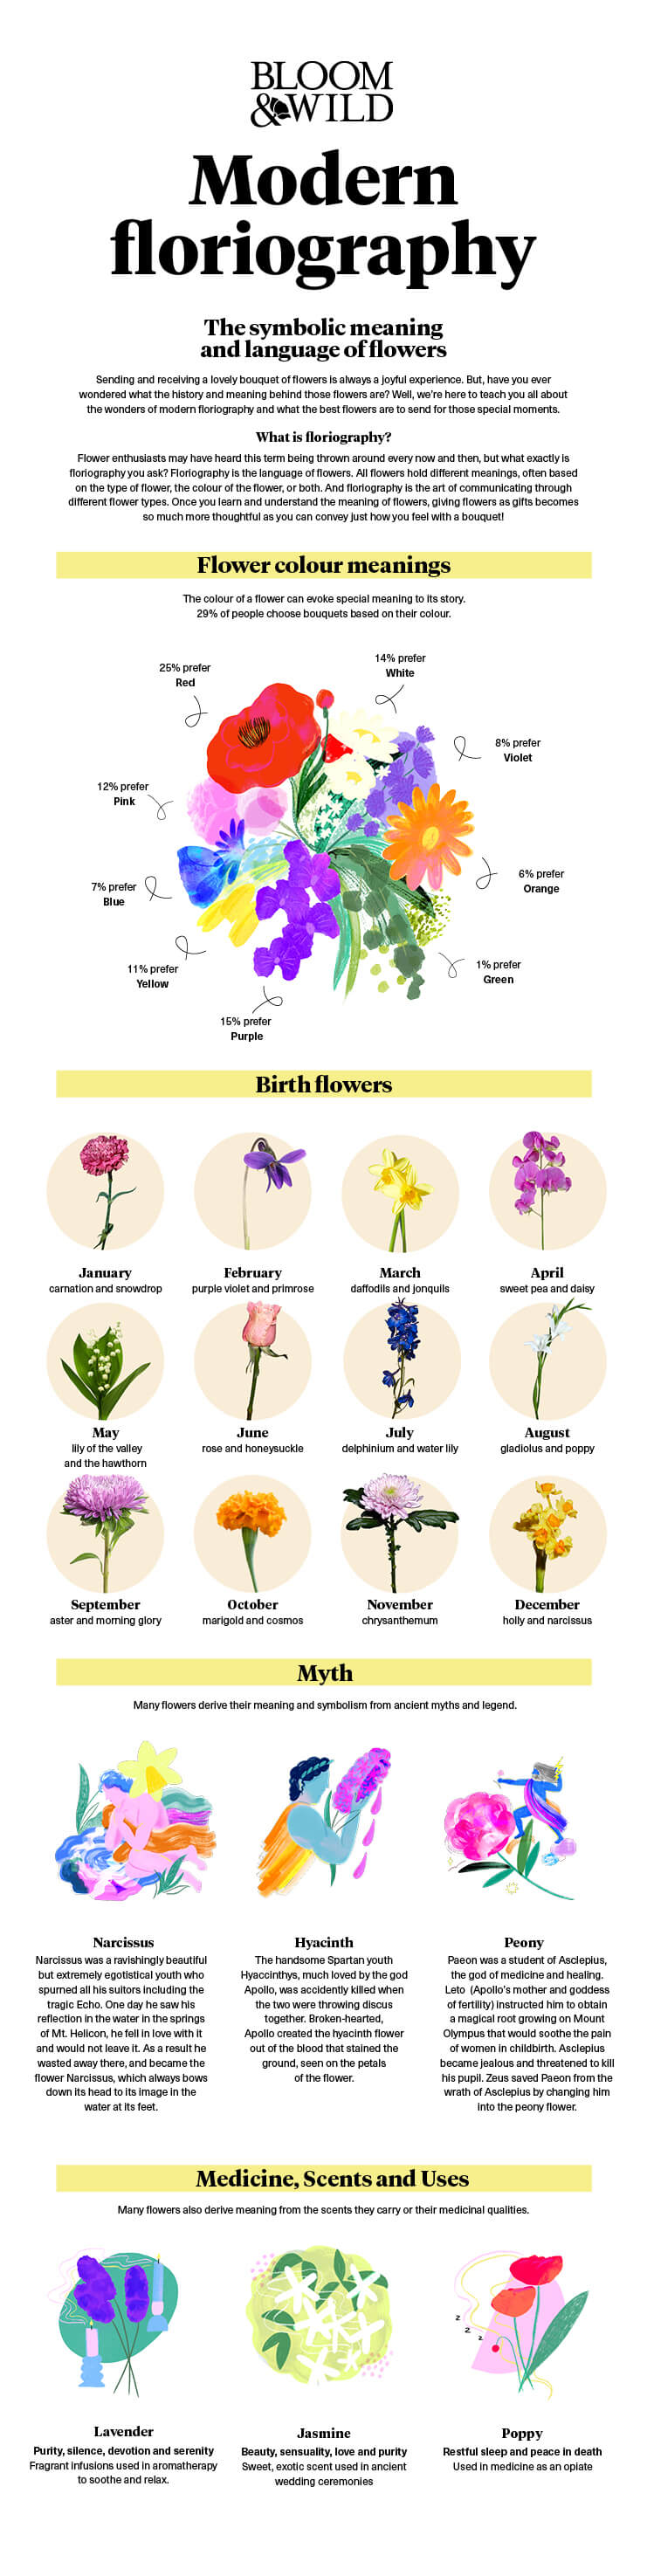 floriography the myths magic and language of flowers